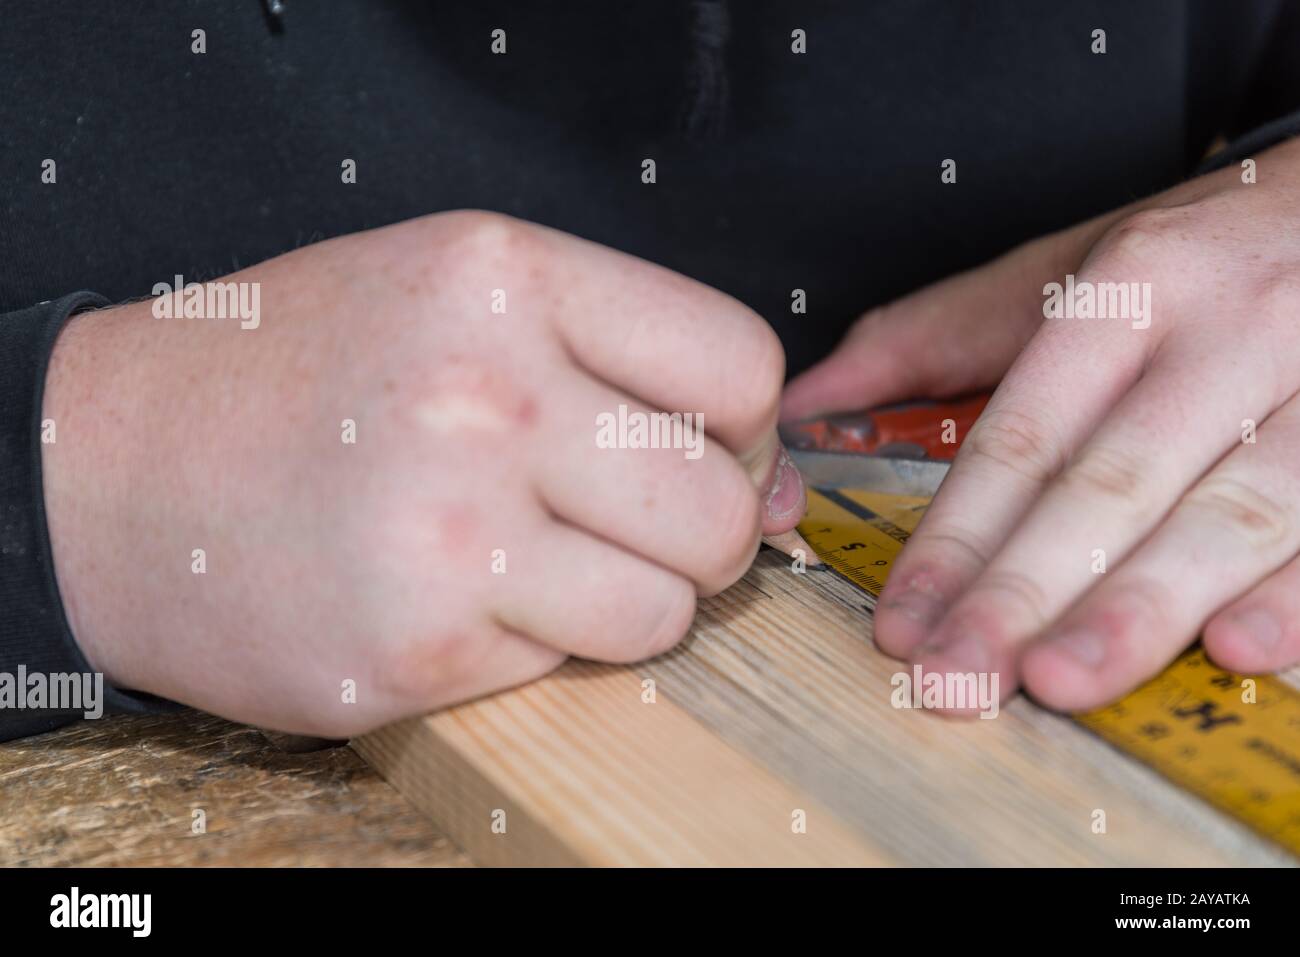 Carpenter measures wood with angle ruler and marks interfaces - close-up Stock Photo